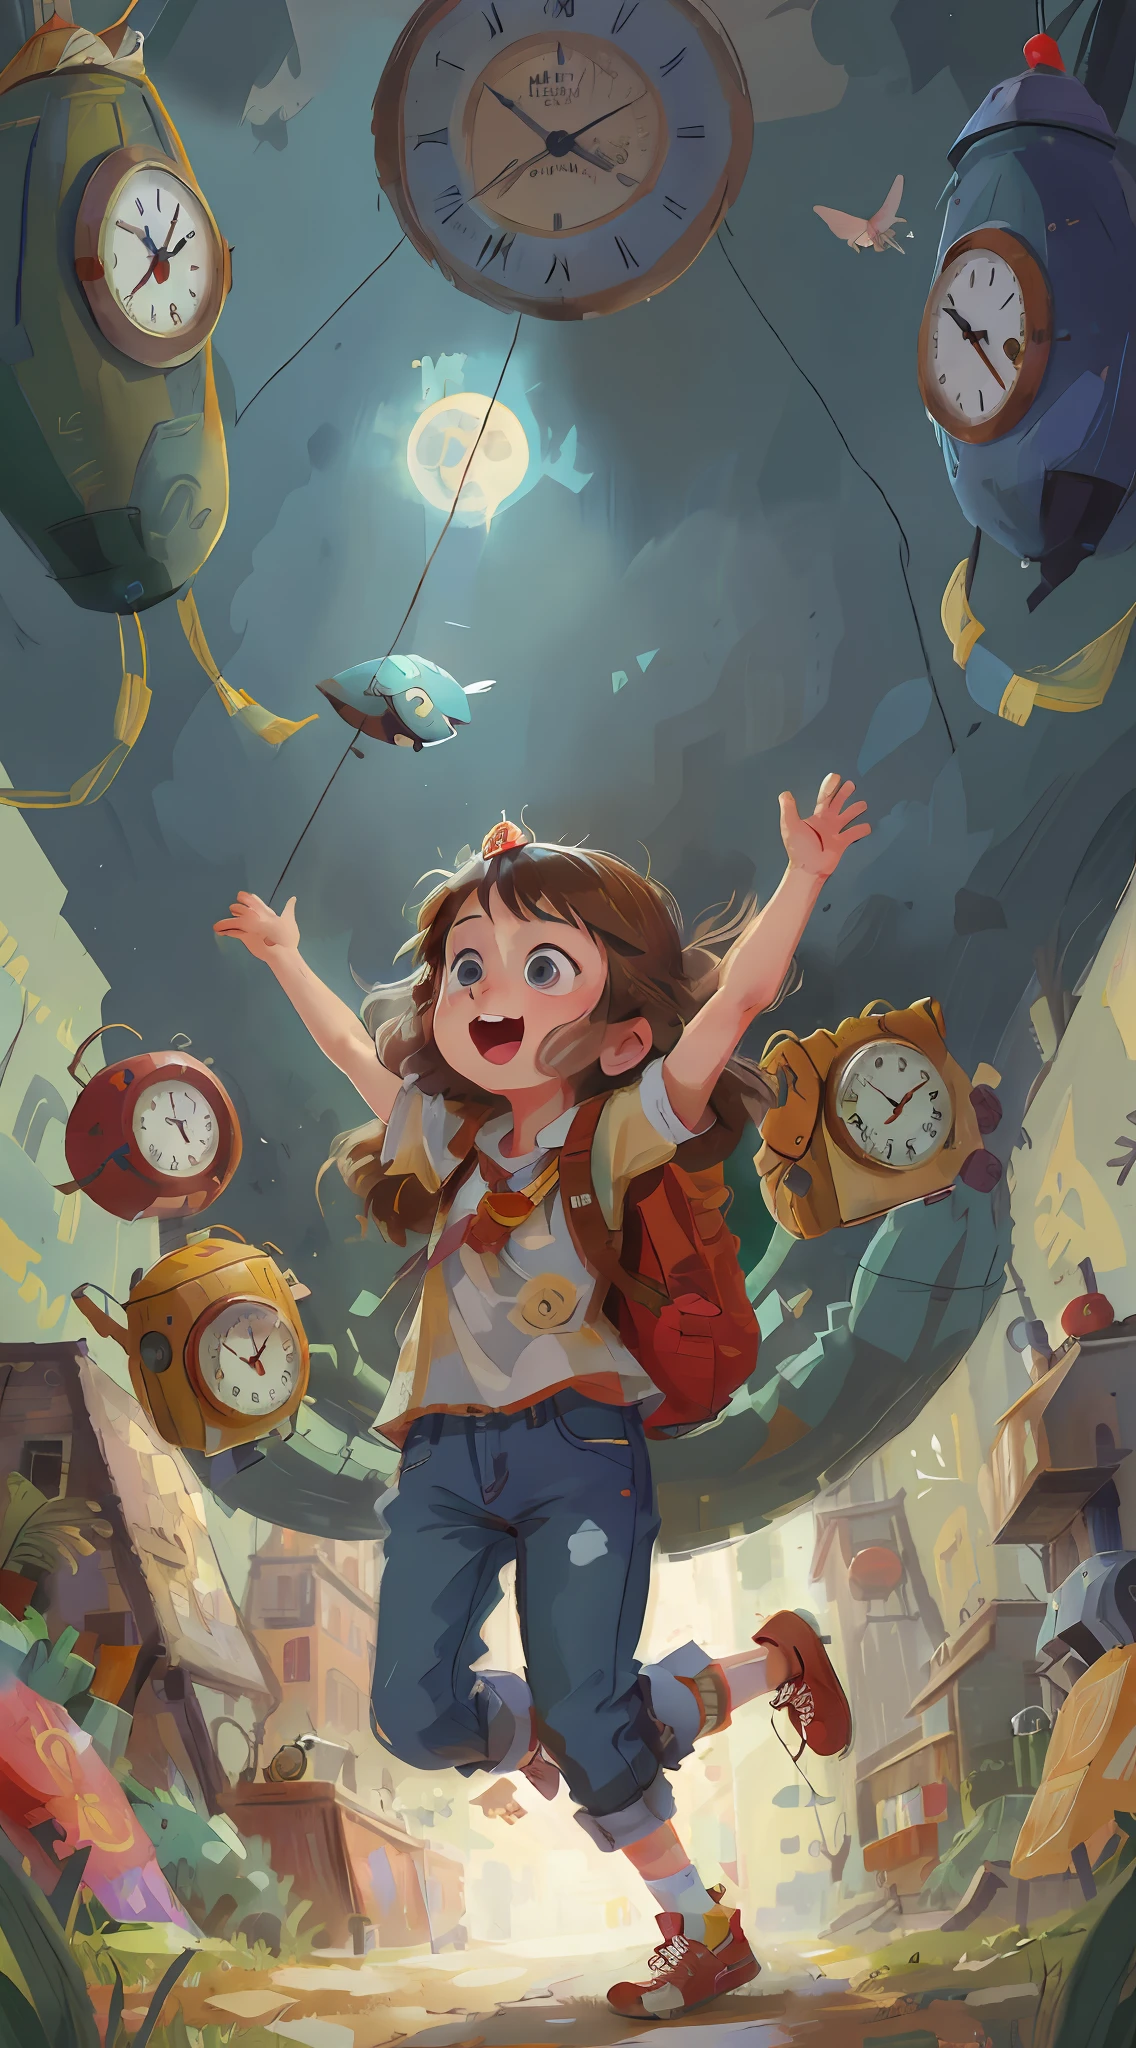 1 long-haired girl wearing jeans, carrying a backpack, with a crown, excited and surprised expression, flying through the time tunnel, surrounded by a lot of clocks, distorted clocks, large and small clocks, science fiction